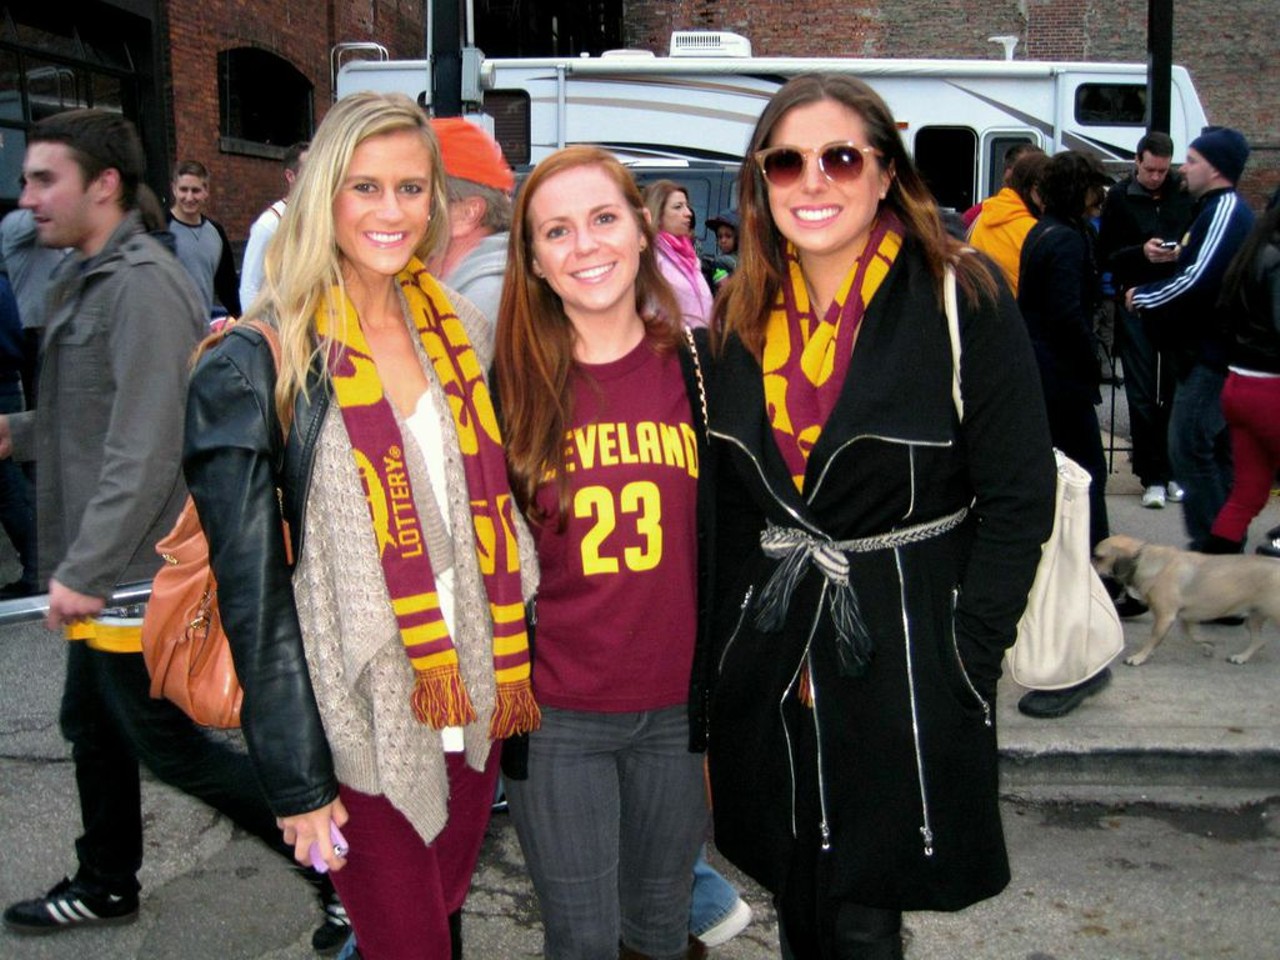 13 Photos of Scene Events Team at the Cavs Kickoff Party